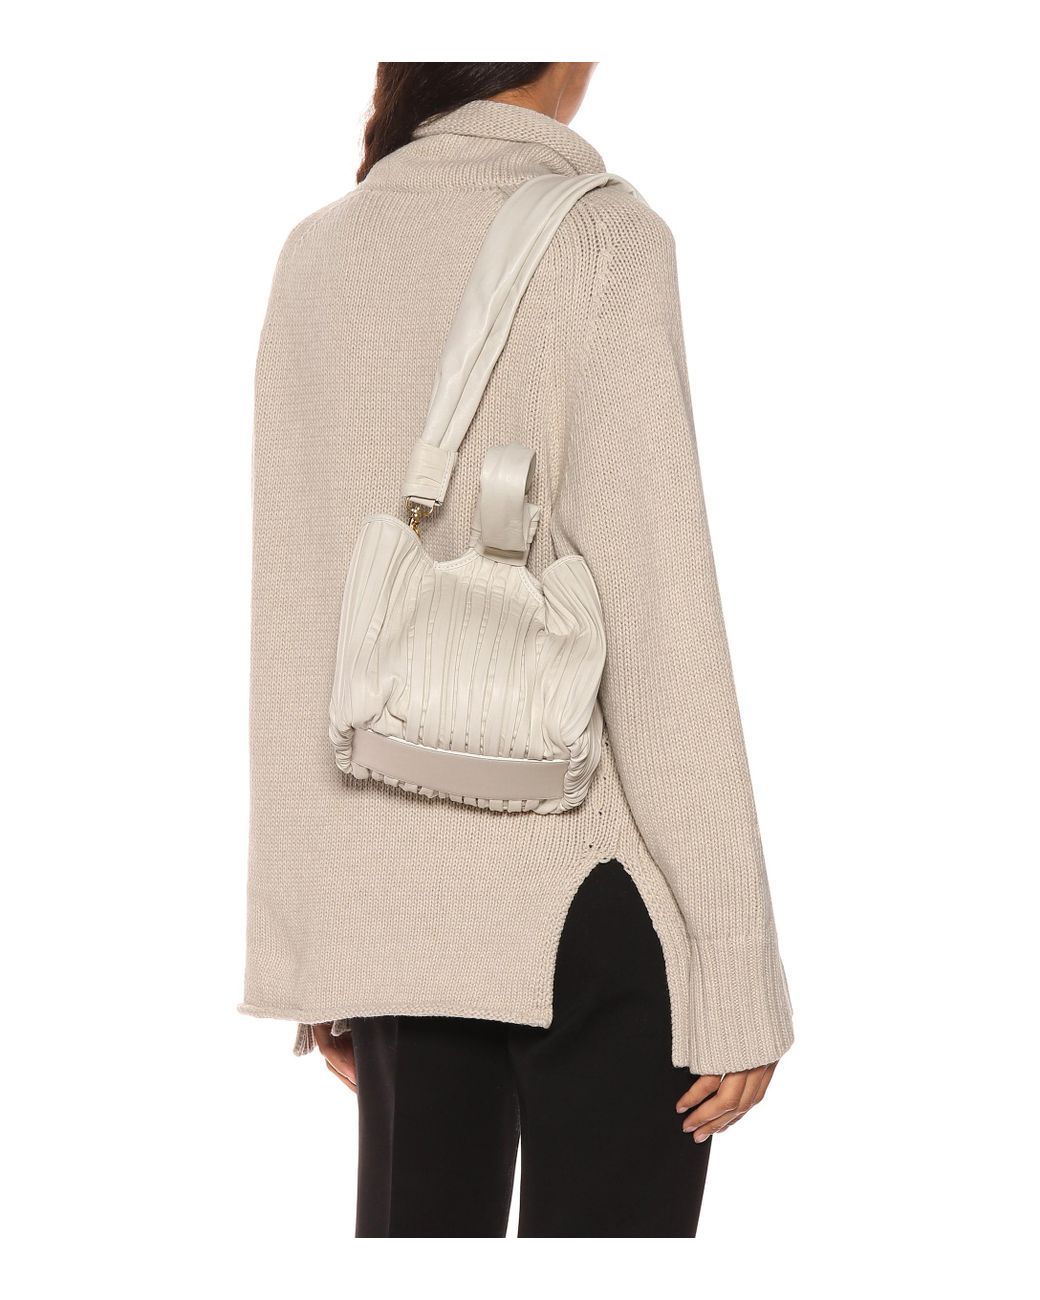 Max Mara Ketty Leather Shoulder Bag in White | Lyst